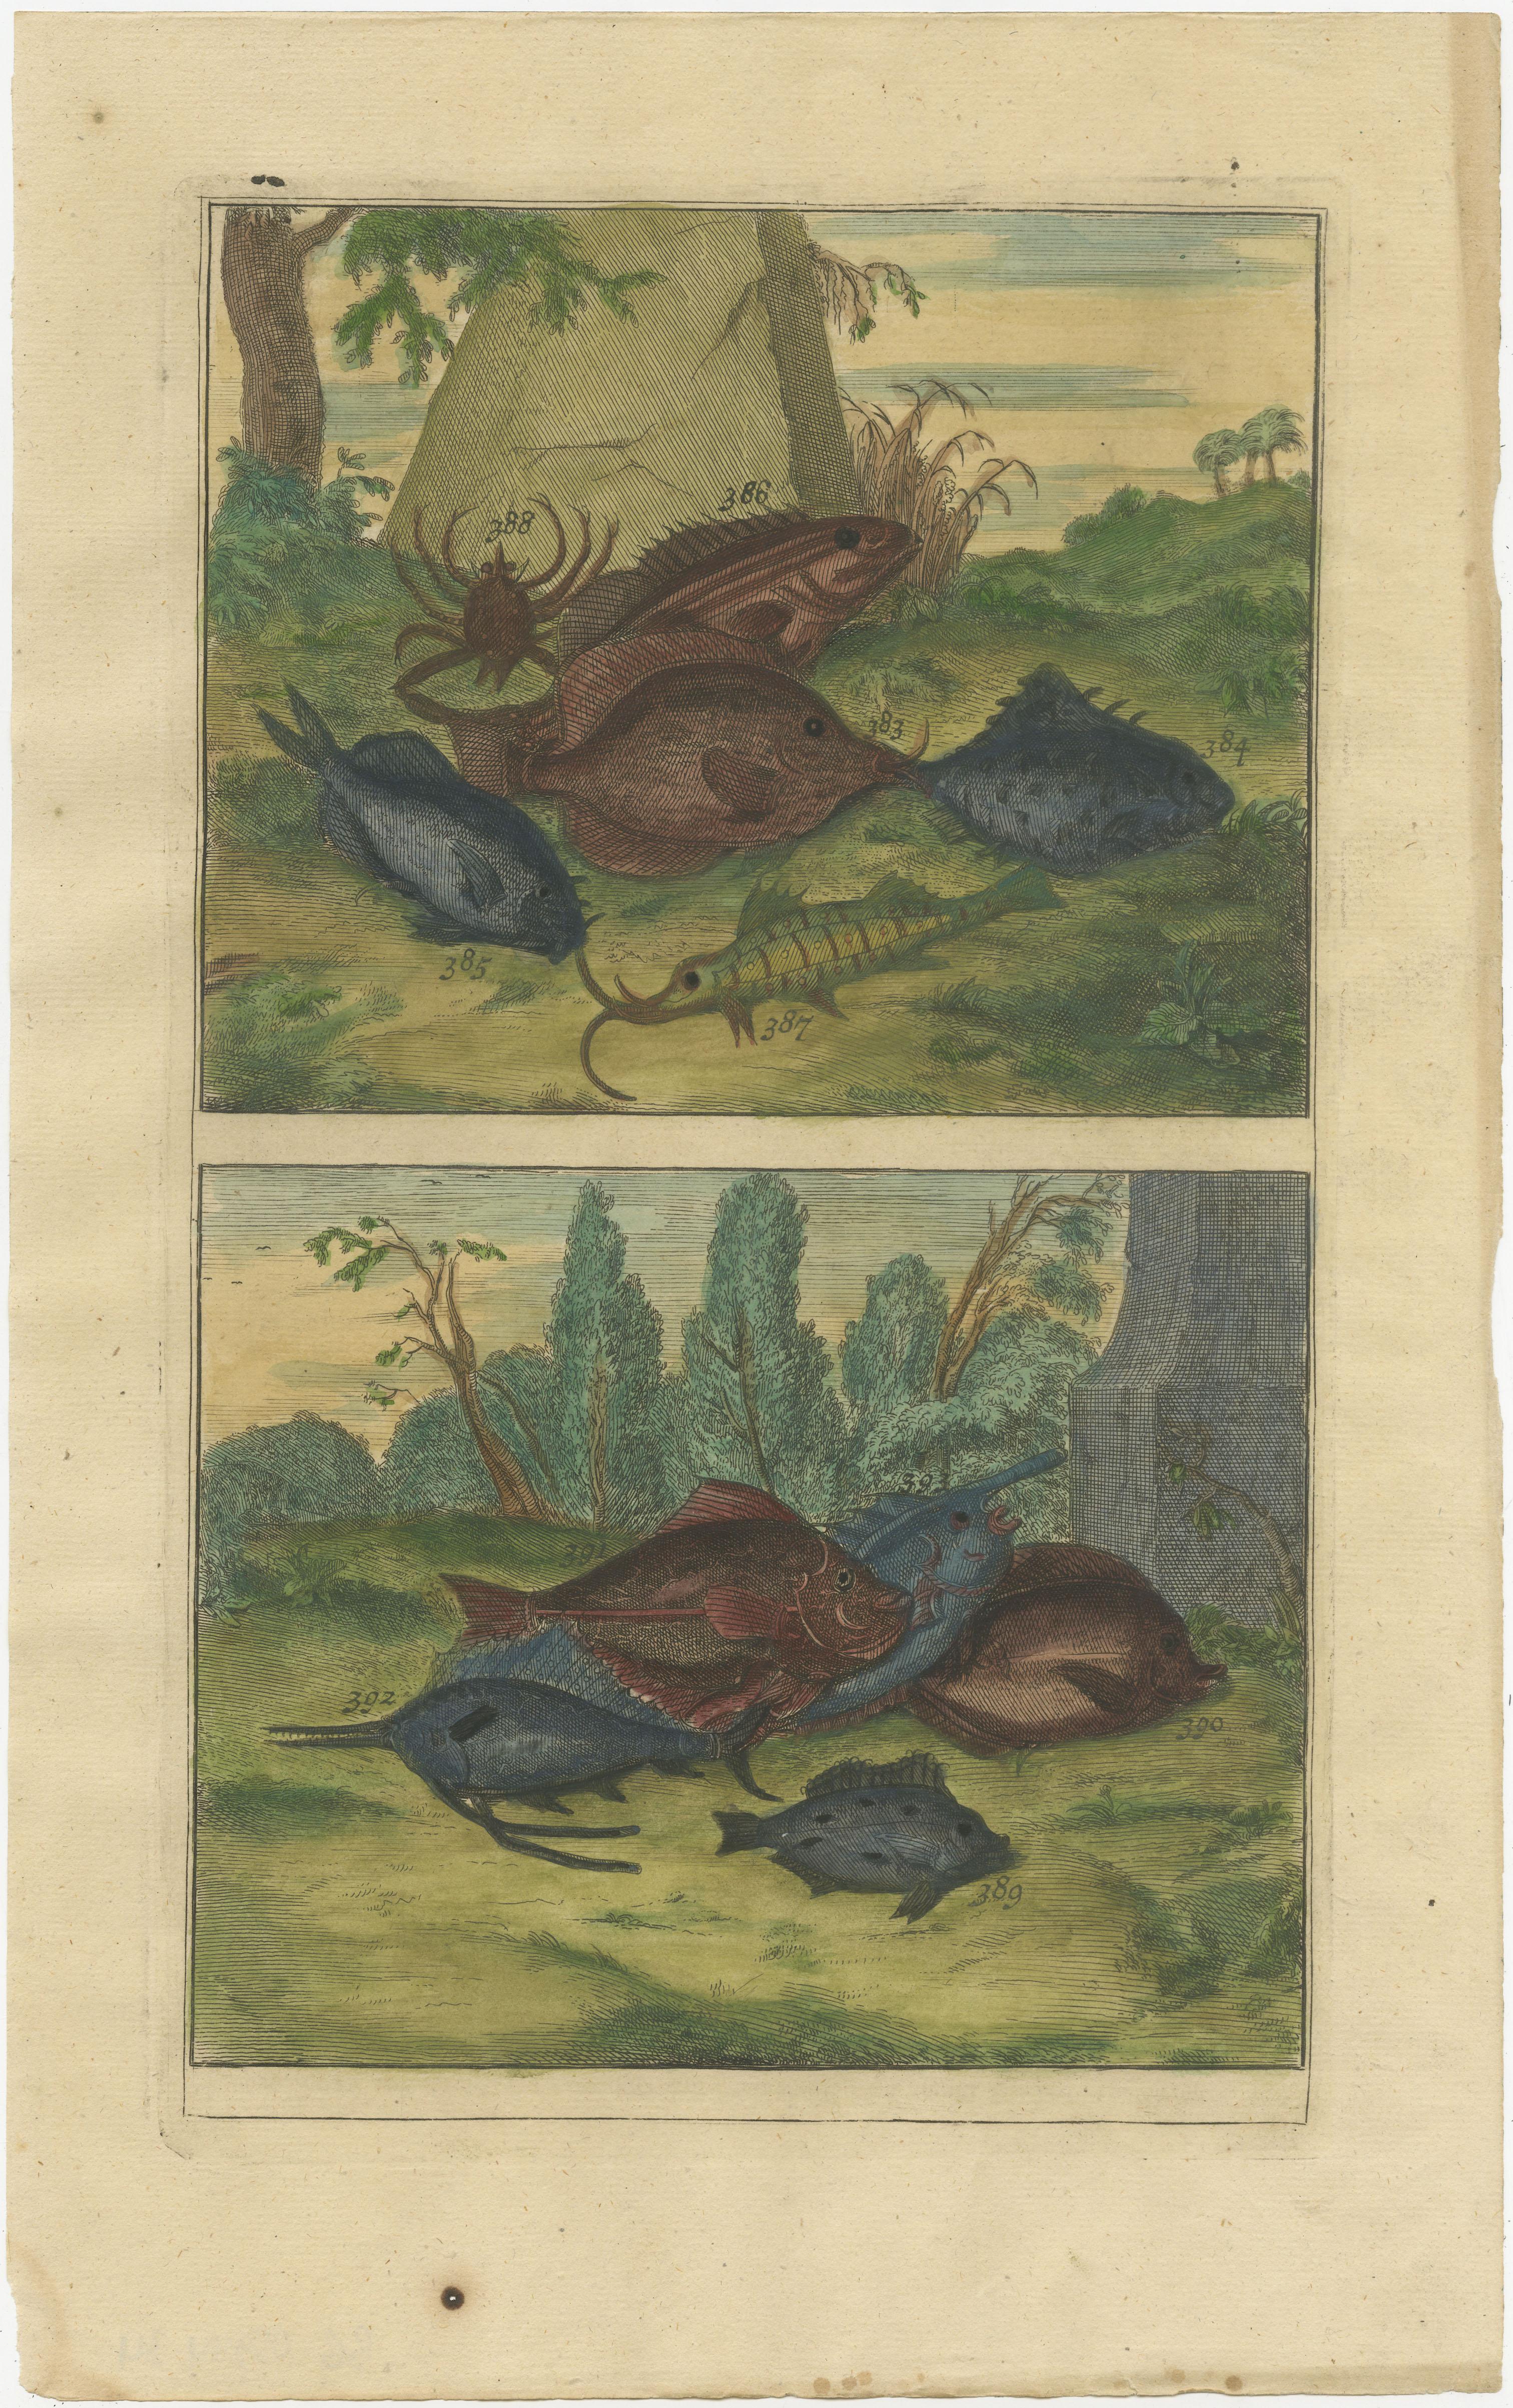 Set of twelve antique prints of various fishes and crustaceans. These print originate from 'Oud en Nieuw Oost-Indiën' by F. Valentijn.

François Valentyn or Valentijn (17 April 1666 – 6 August 1727) was a Dutch Calvinist minister, naturalist and